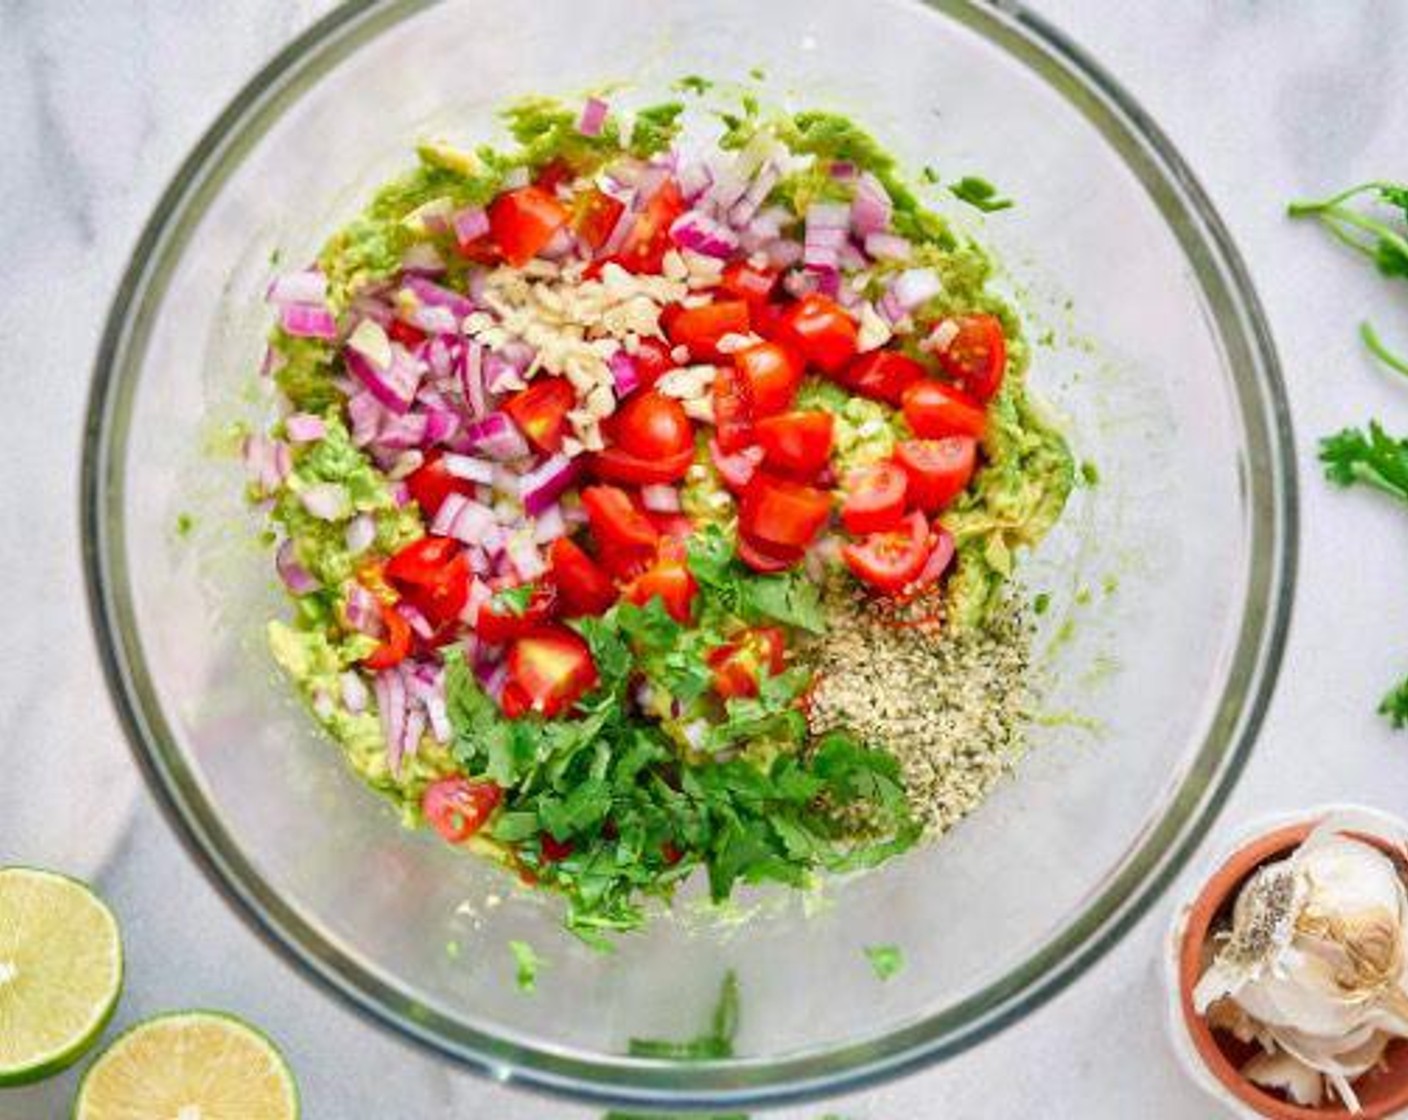 step 1 In a large bowl, stir in Avocados (4), Red Onion (1/4), Grape Tomatoes (3/4 cup), Hemp Hearts (3 Tbsp), Garlic (1 clove), and Limes (2).